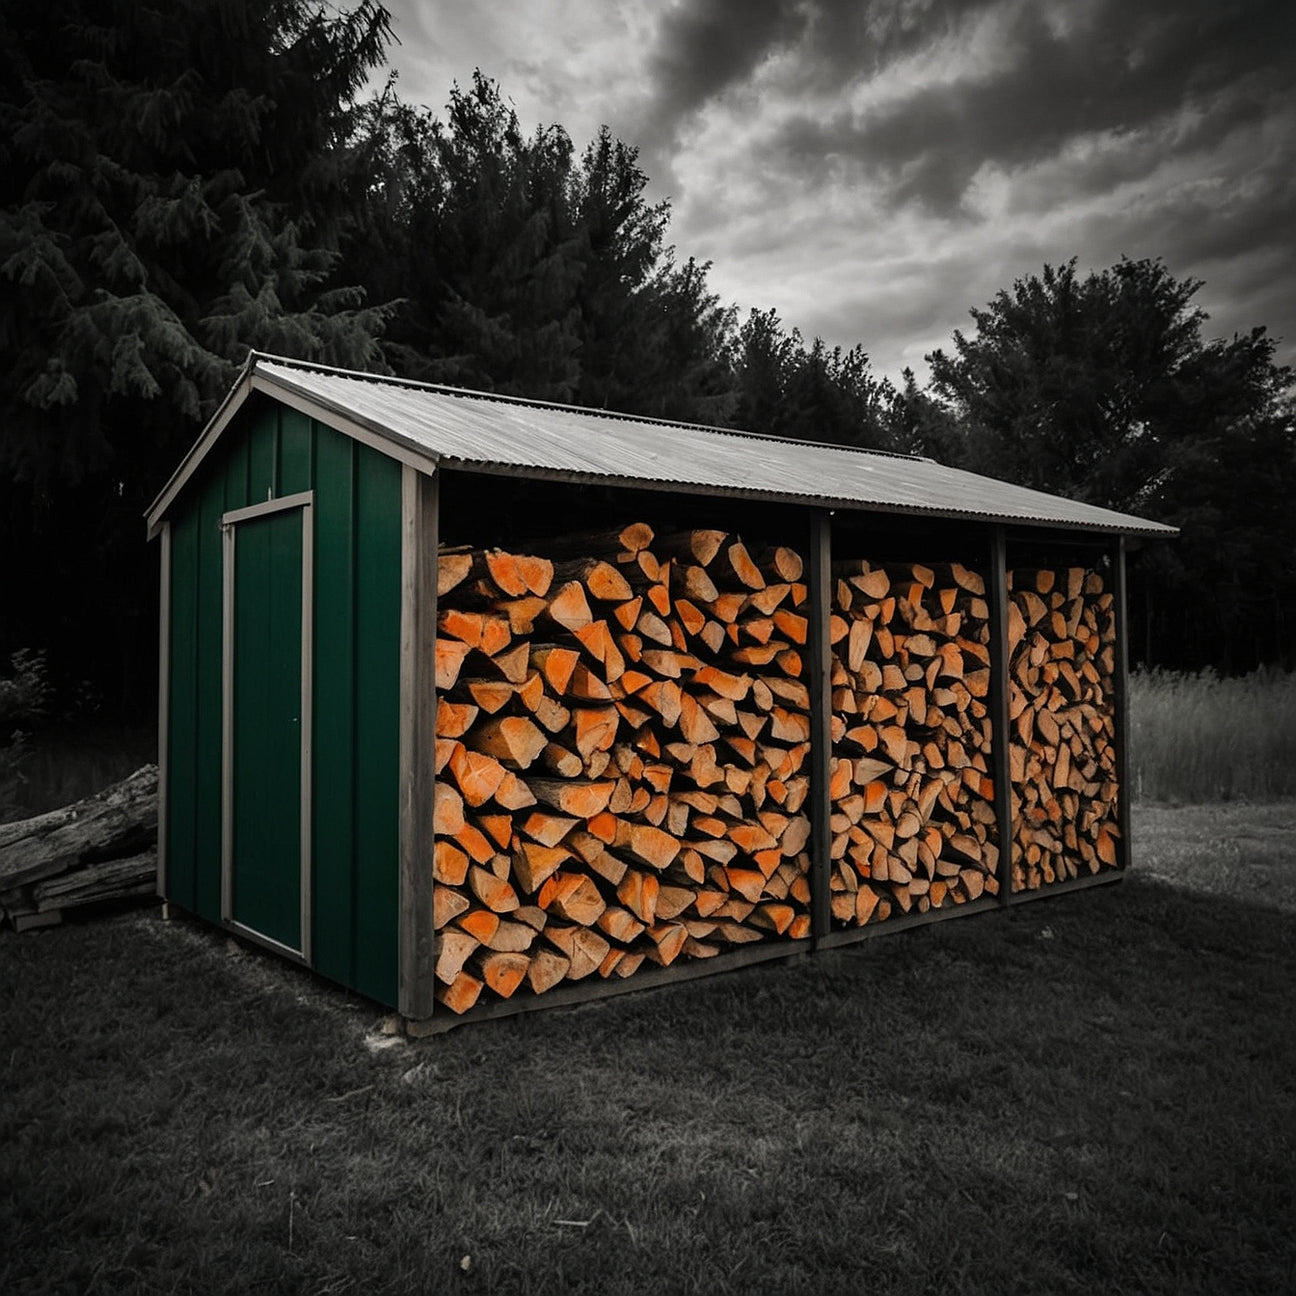 green firewood shed outdoors, country side with trees behind